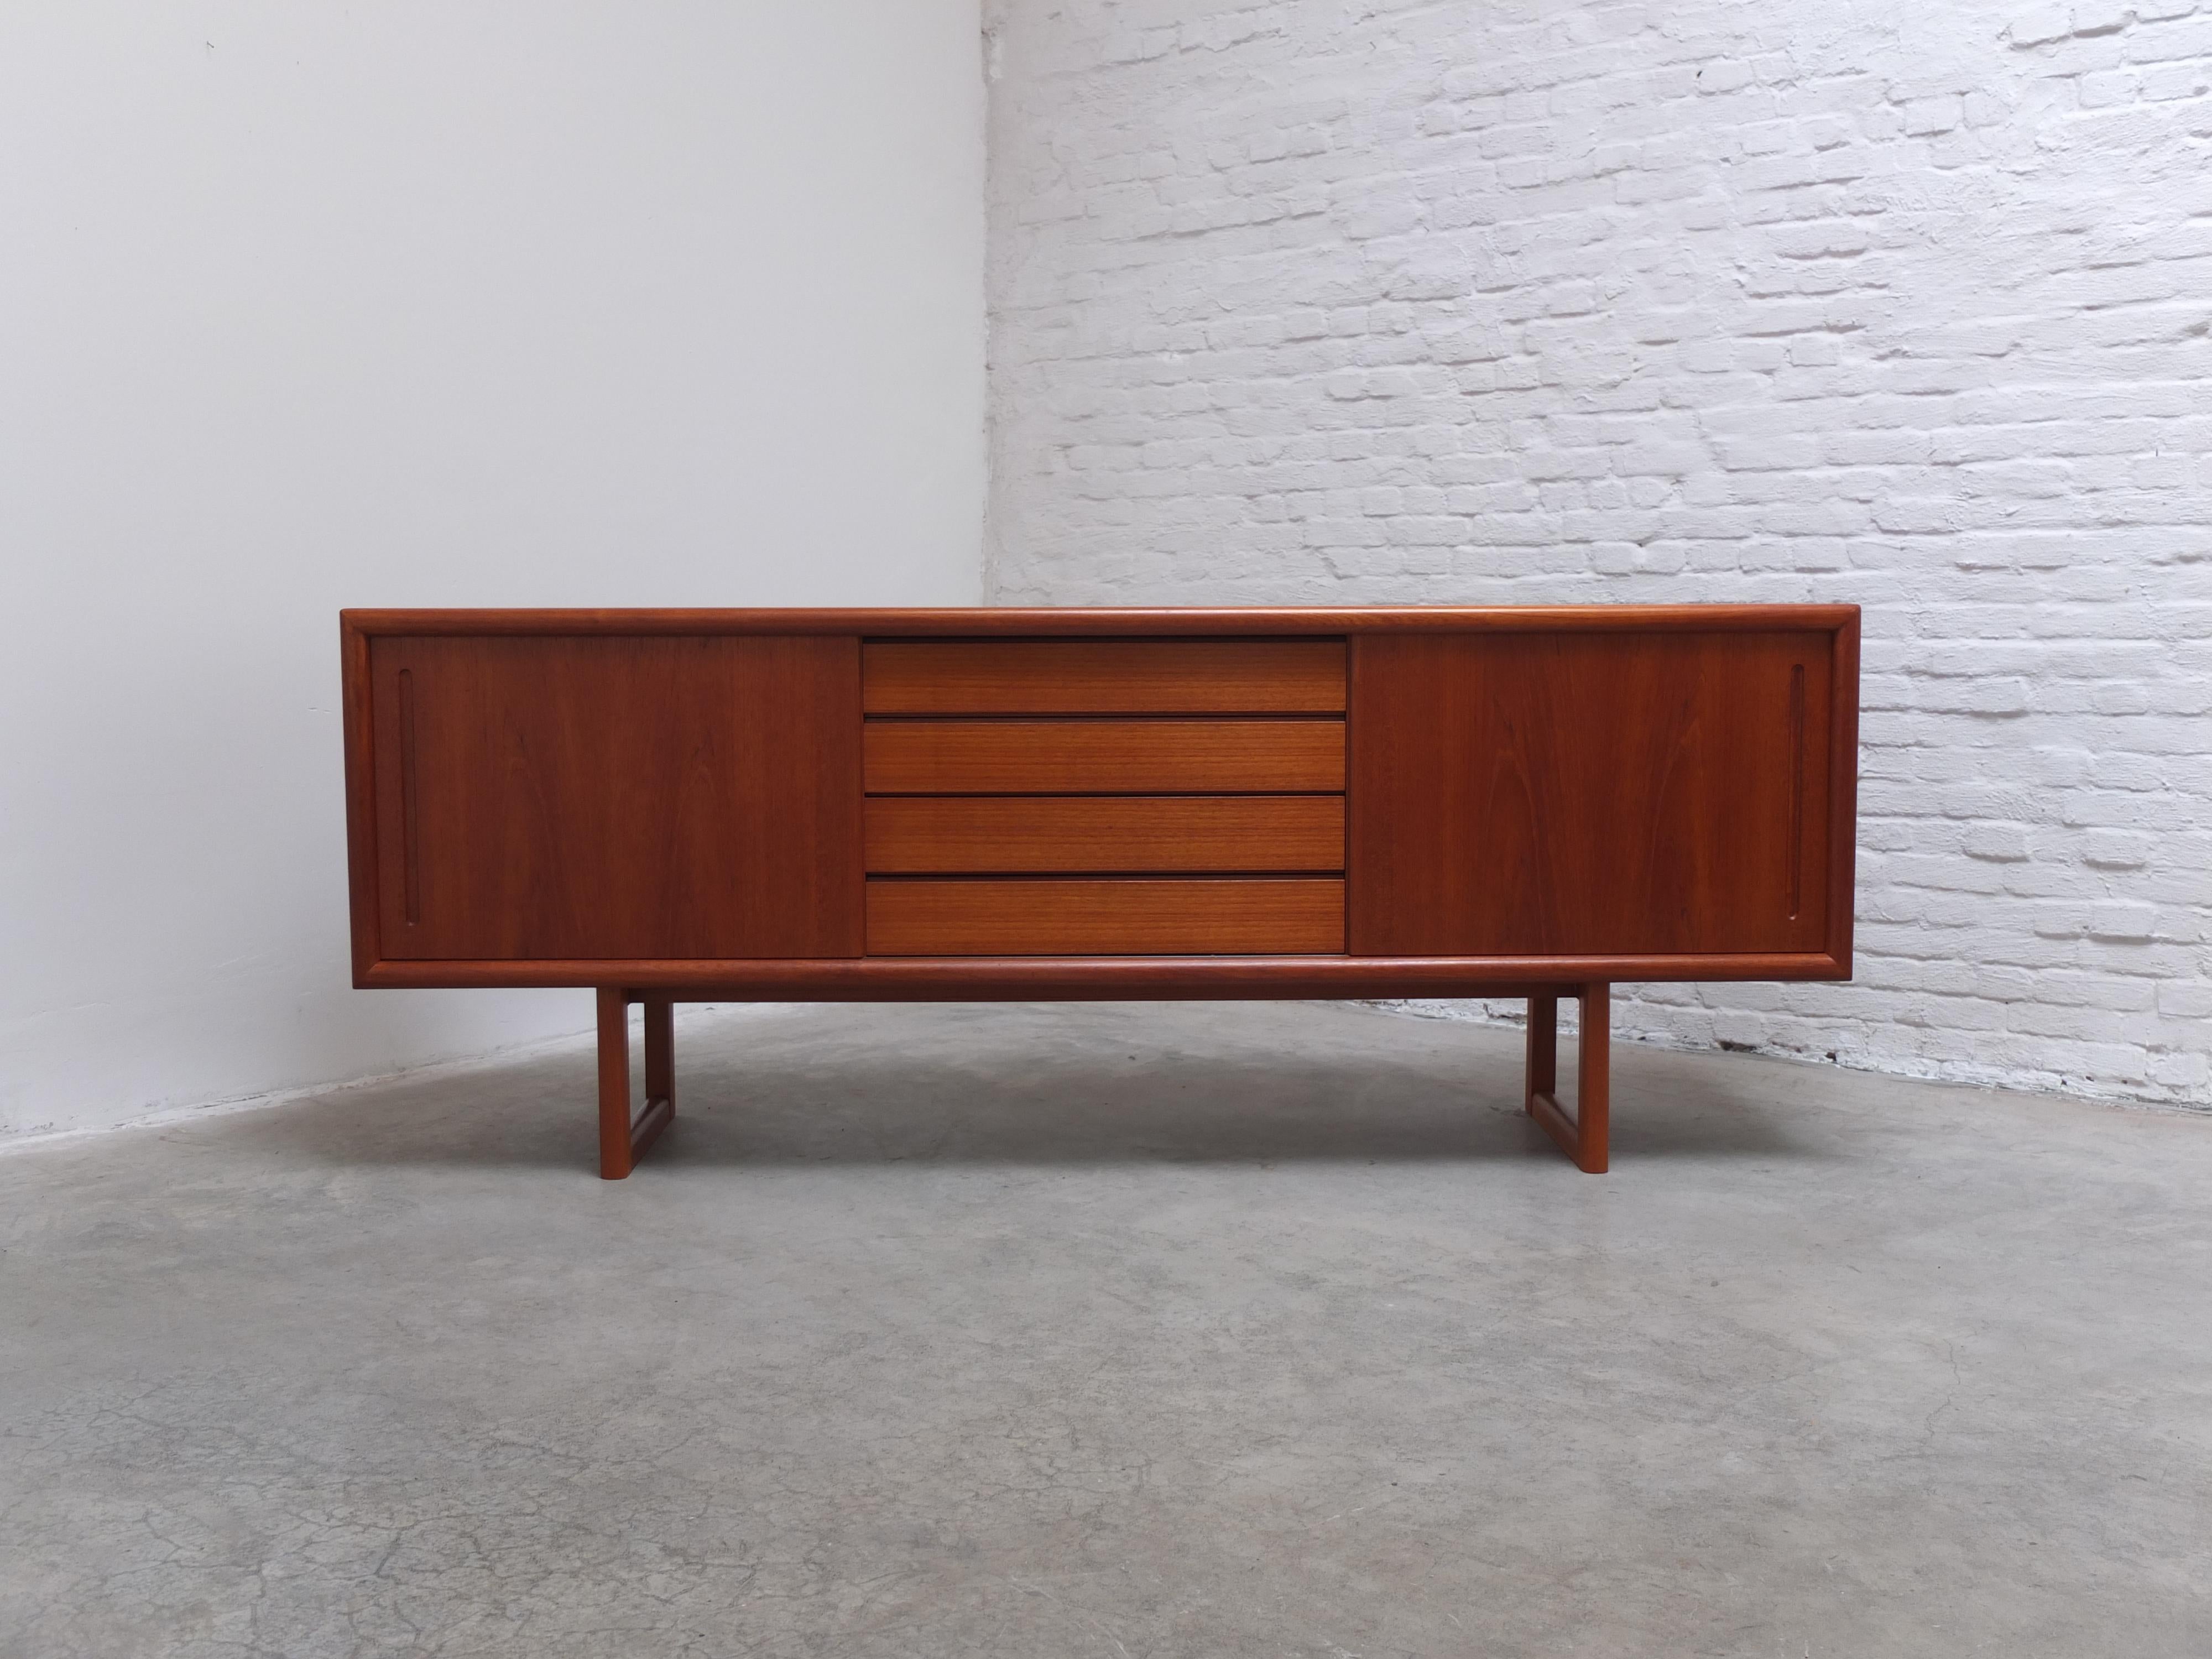 A very beautiful sideboard produced in Denmark during the 1960s. A model I have not seen before and therefor no designer or maker is currently known but this one is built with great craftsmanship. This is visible thanks to the nice teak wood used